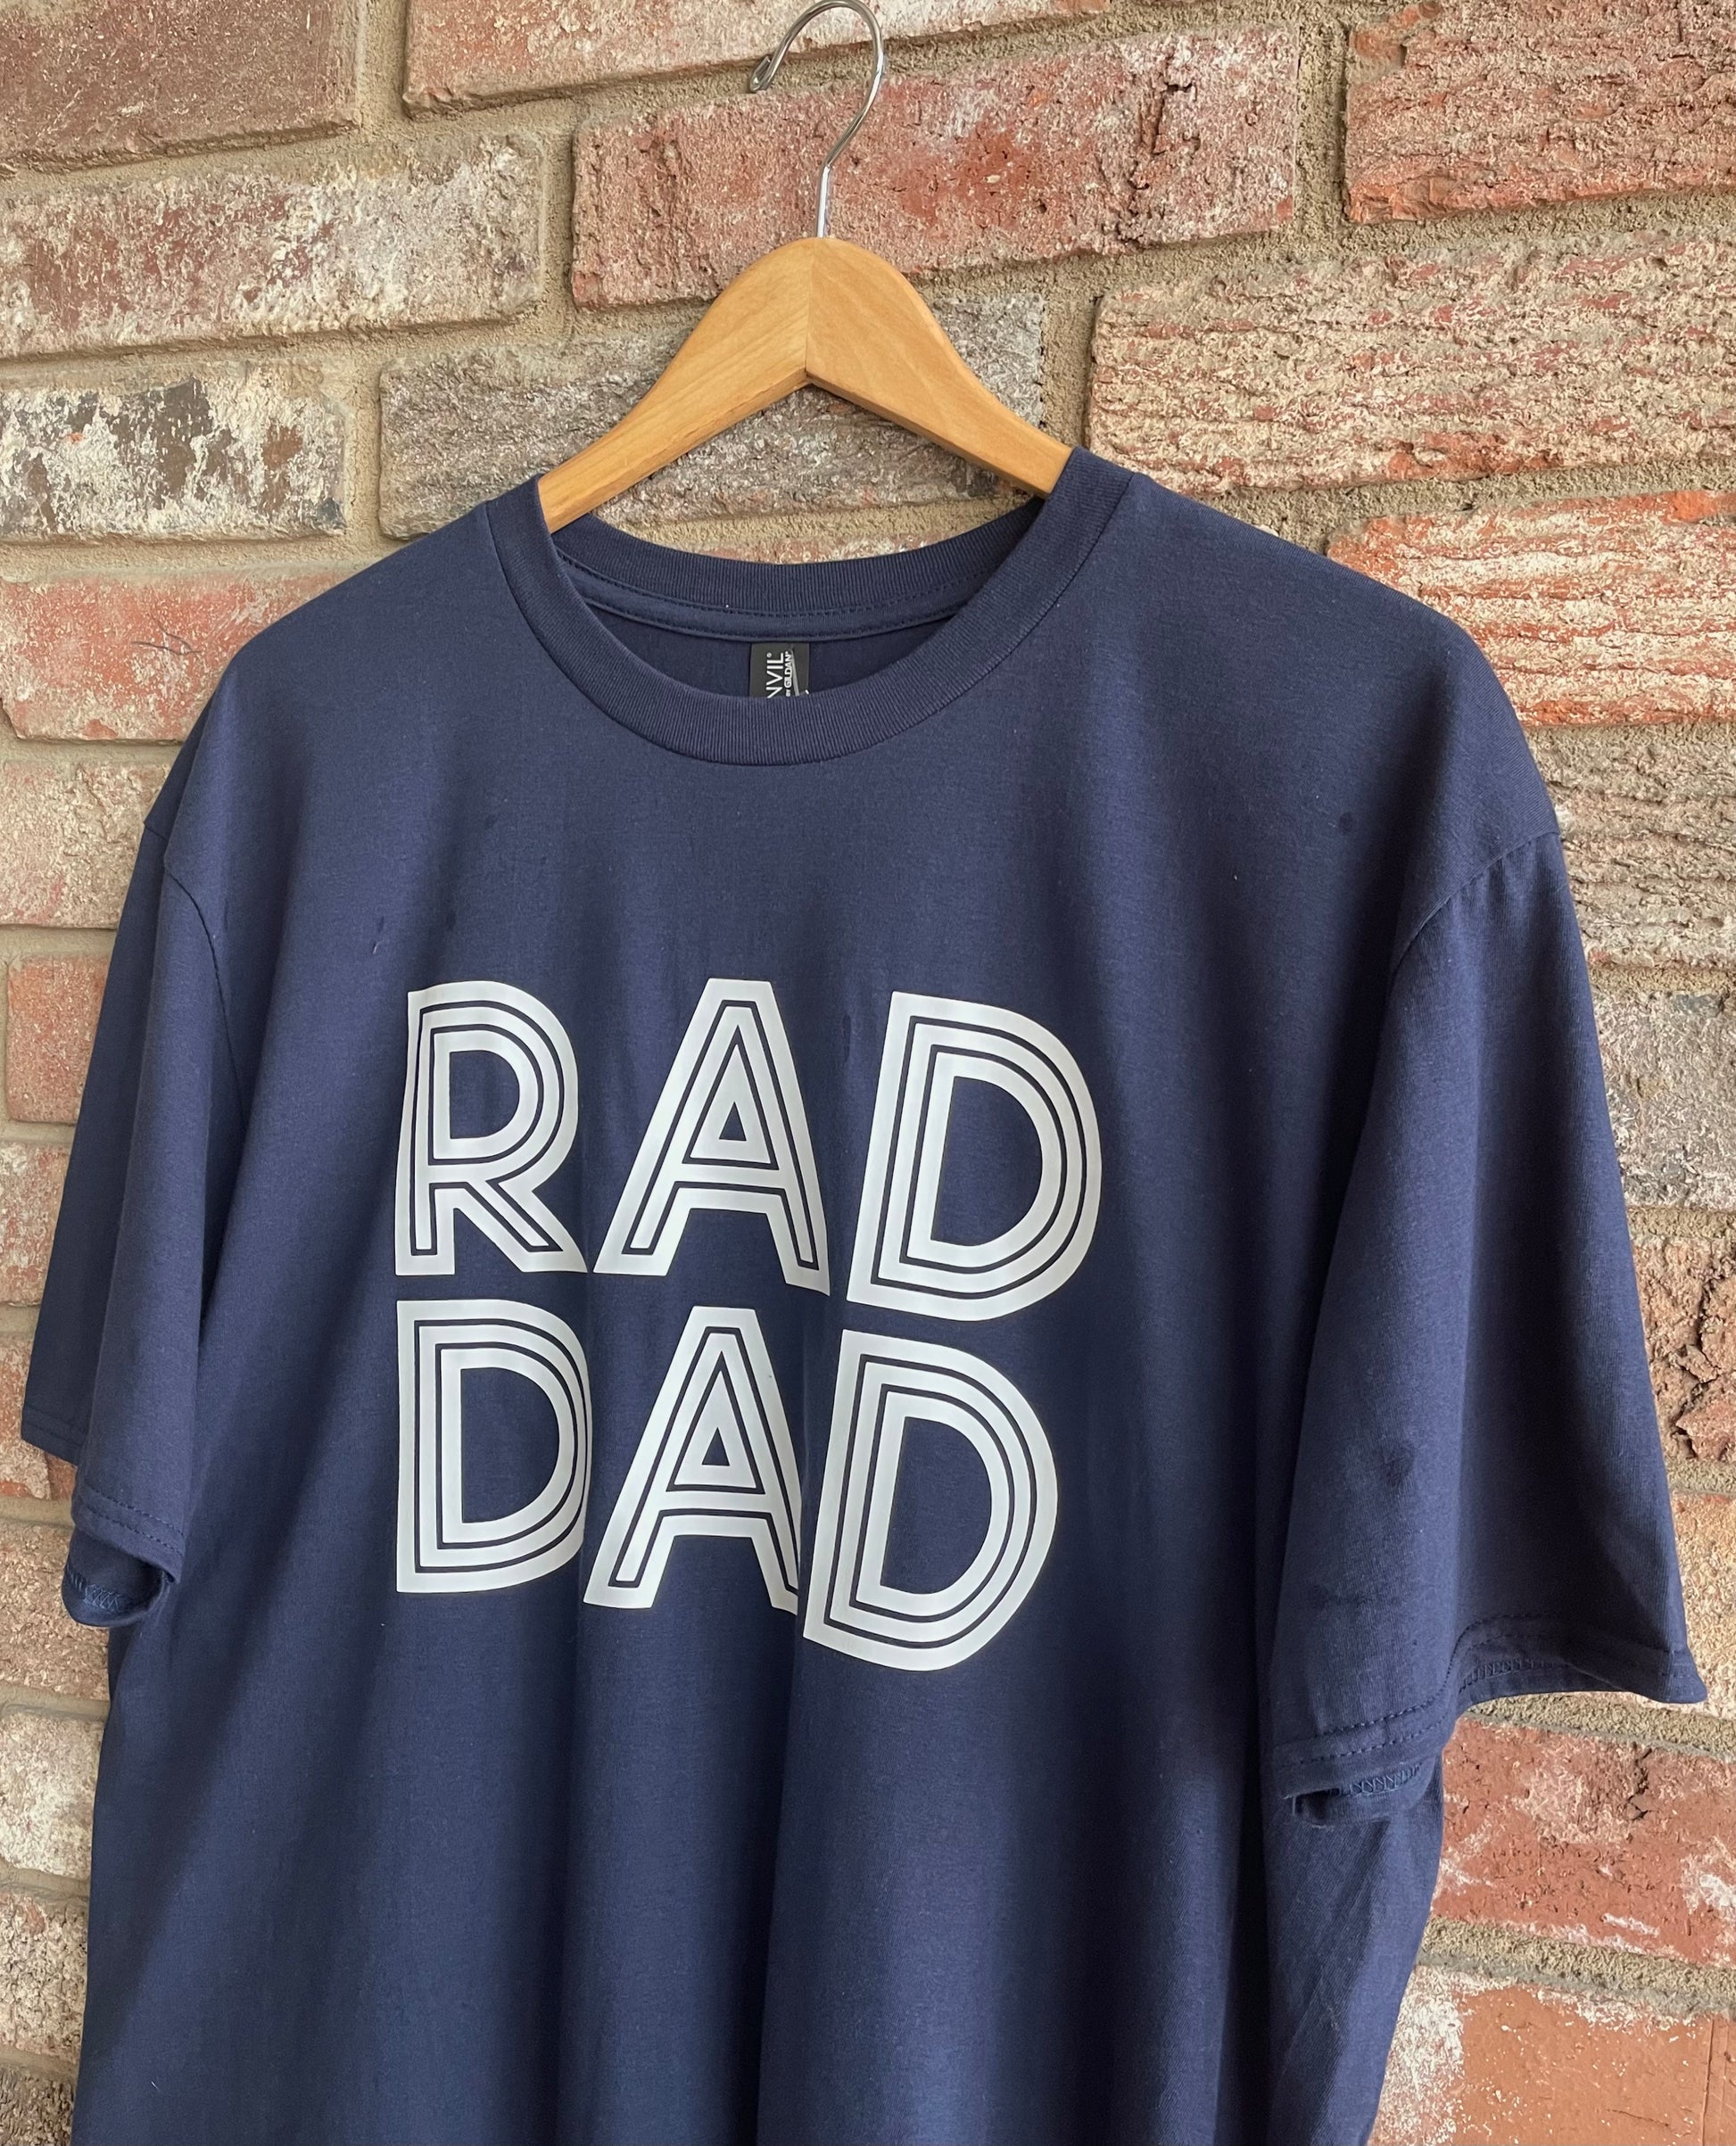 This is a navy blue unisex style tee with lettering, stating, "RAD DAD" on the front. It is a regular fit with a crew neckline. Looking for a fun tee for Father's Day? Look no further!